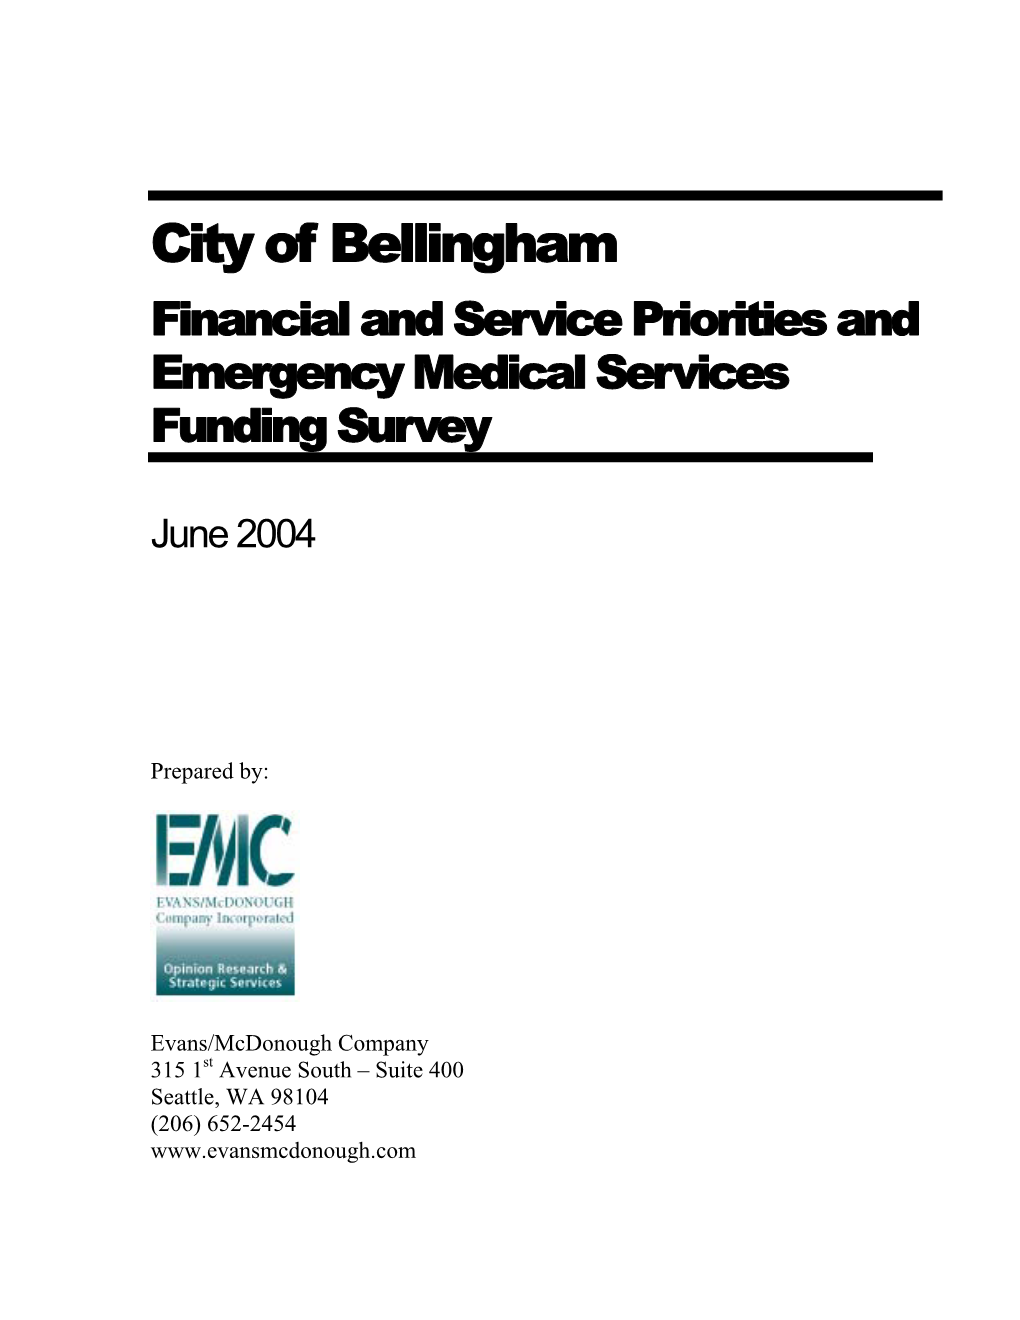 2004 Financial and Service Priorities (PDF)